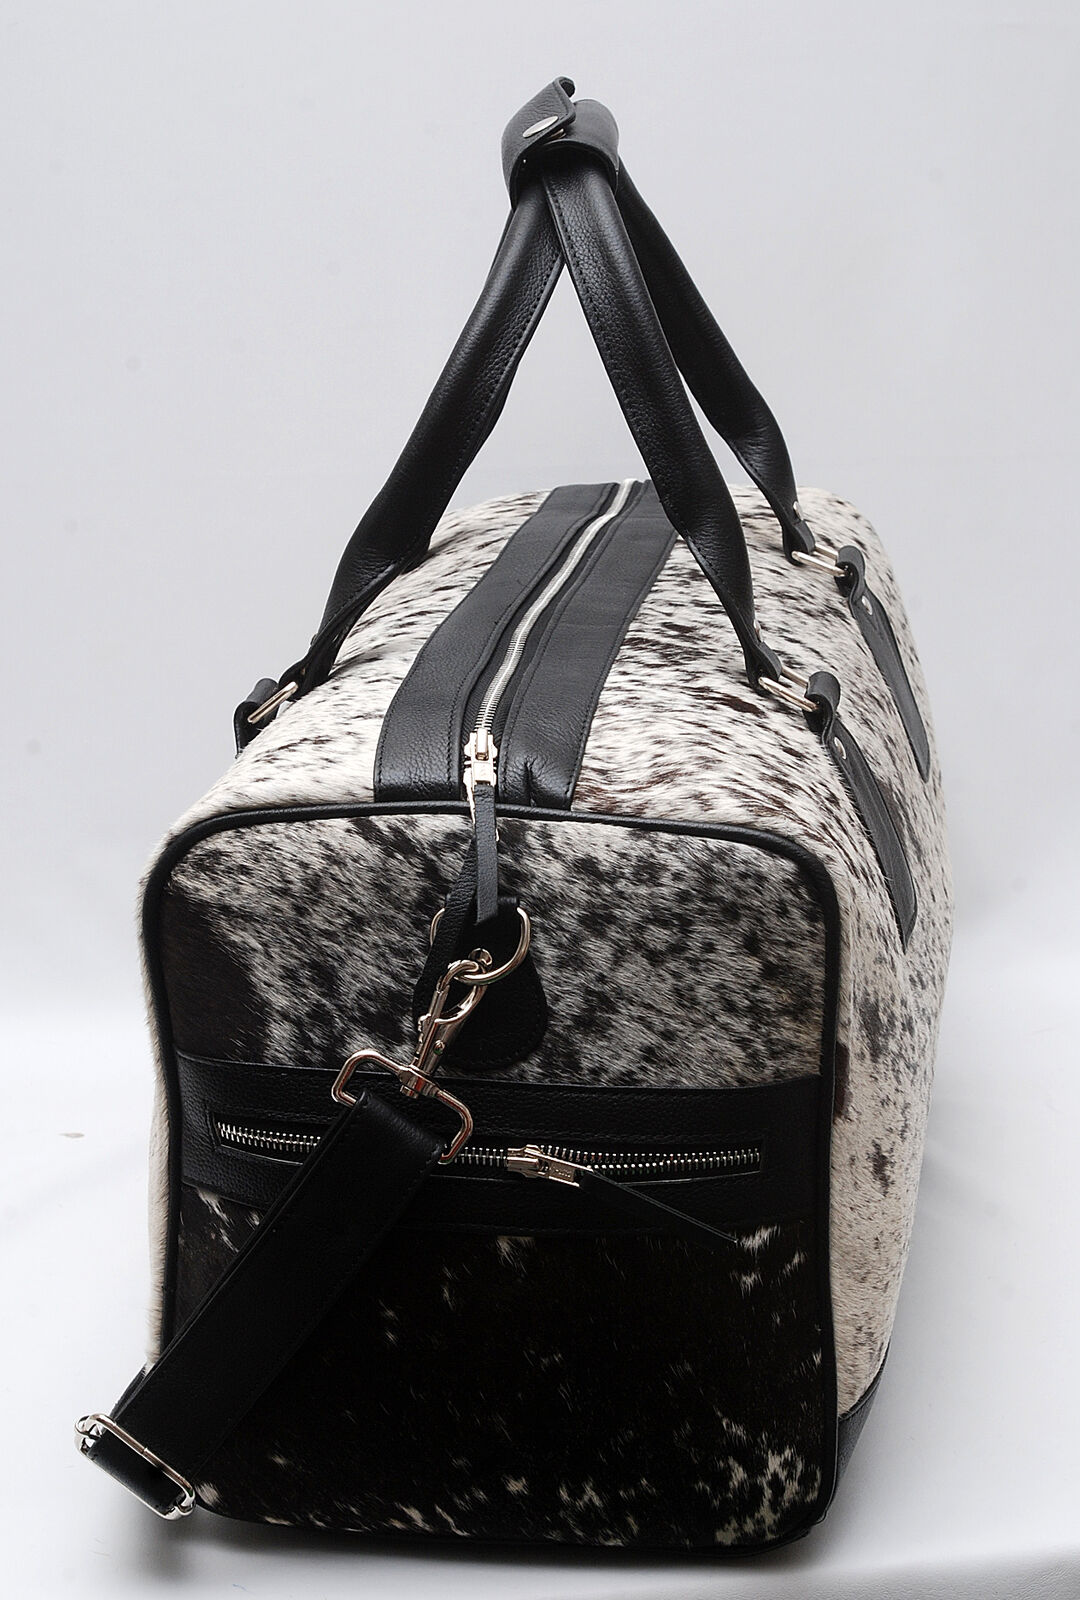 Make a statement at the gym with this cow skin gym bag, a perfect balance of functionality and impeccable design for the active individual.